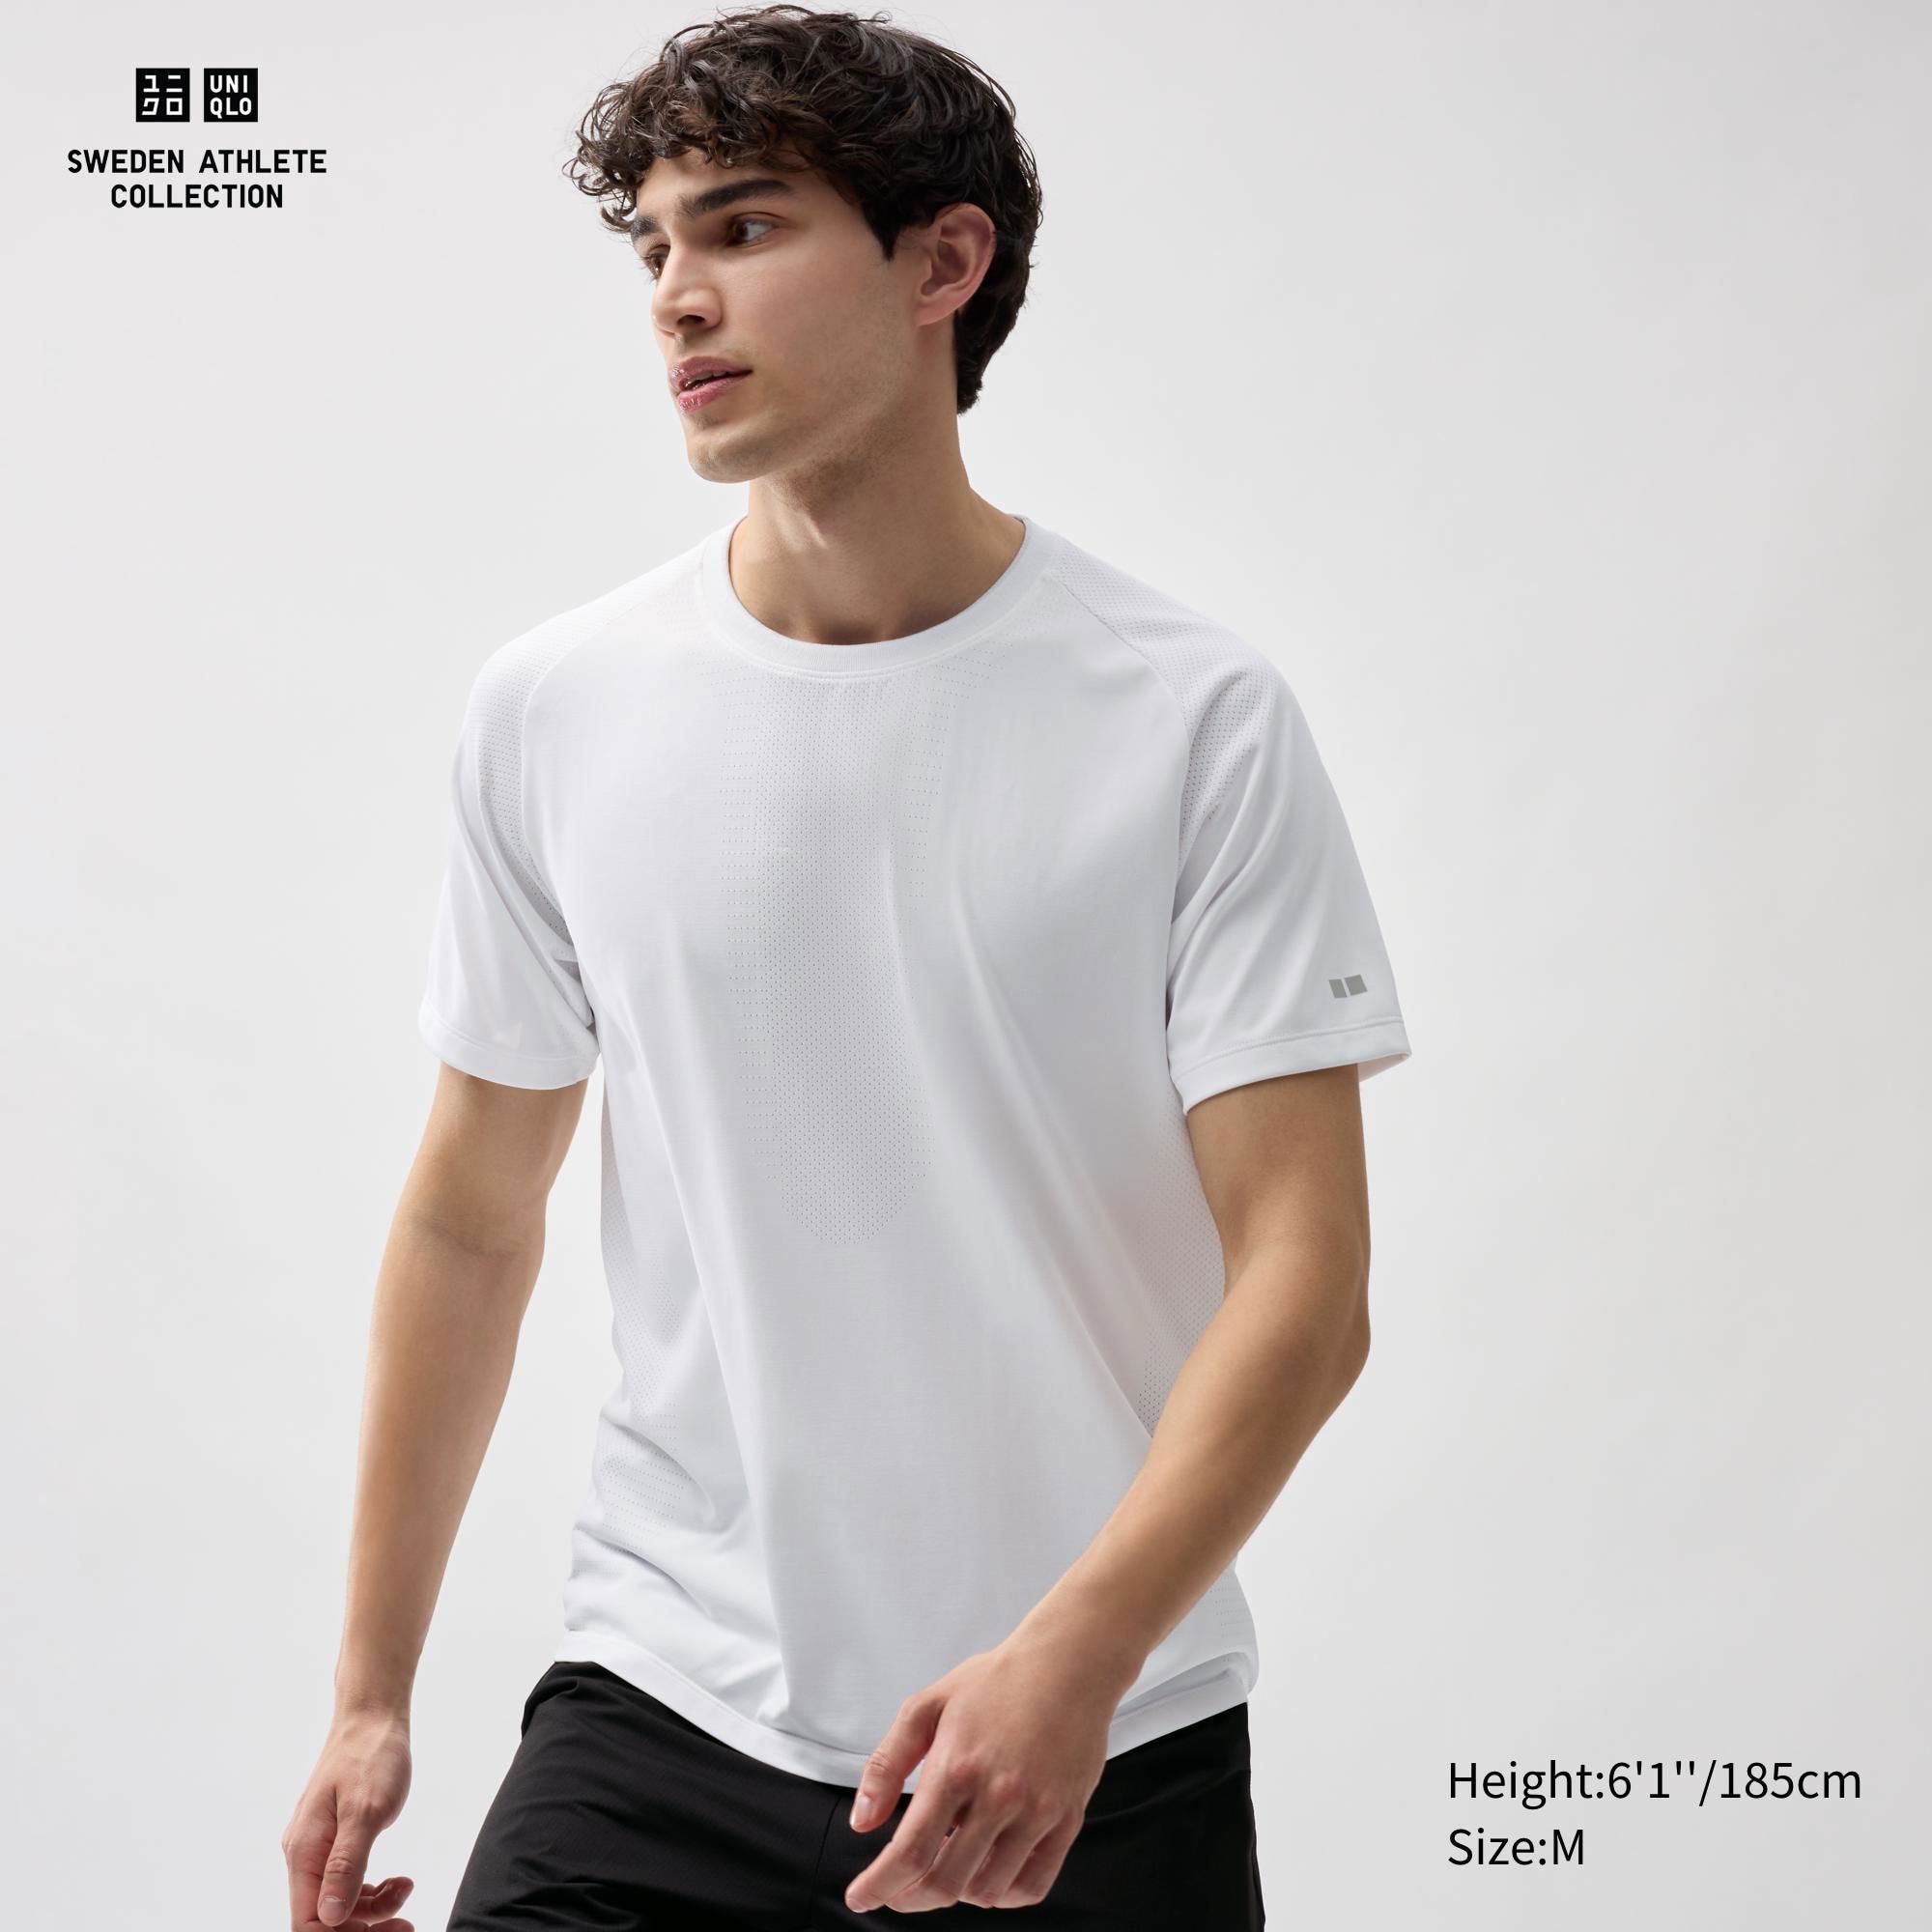 DRY-EX Short-Sleeve Crew Neck T-Shirt by UNIQLO